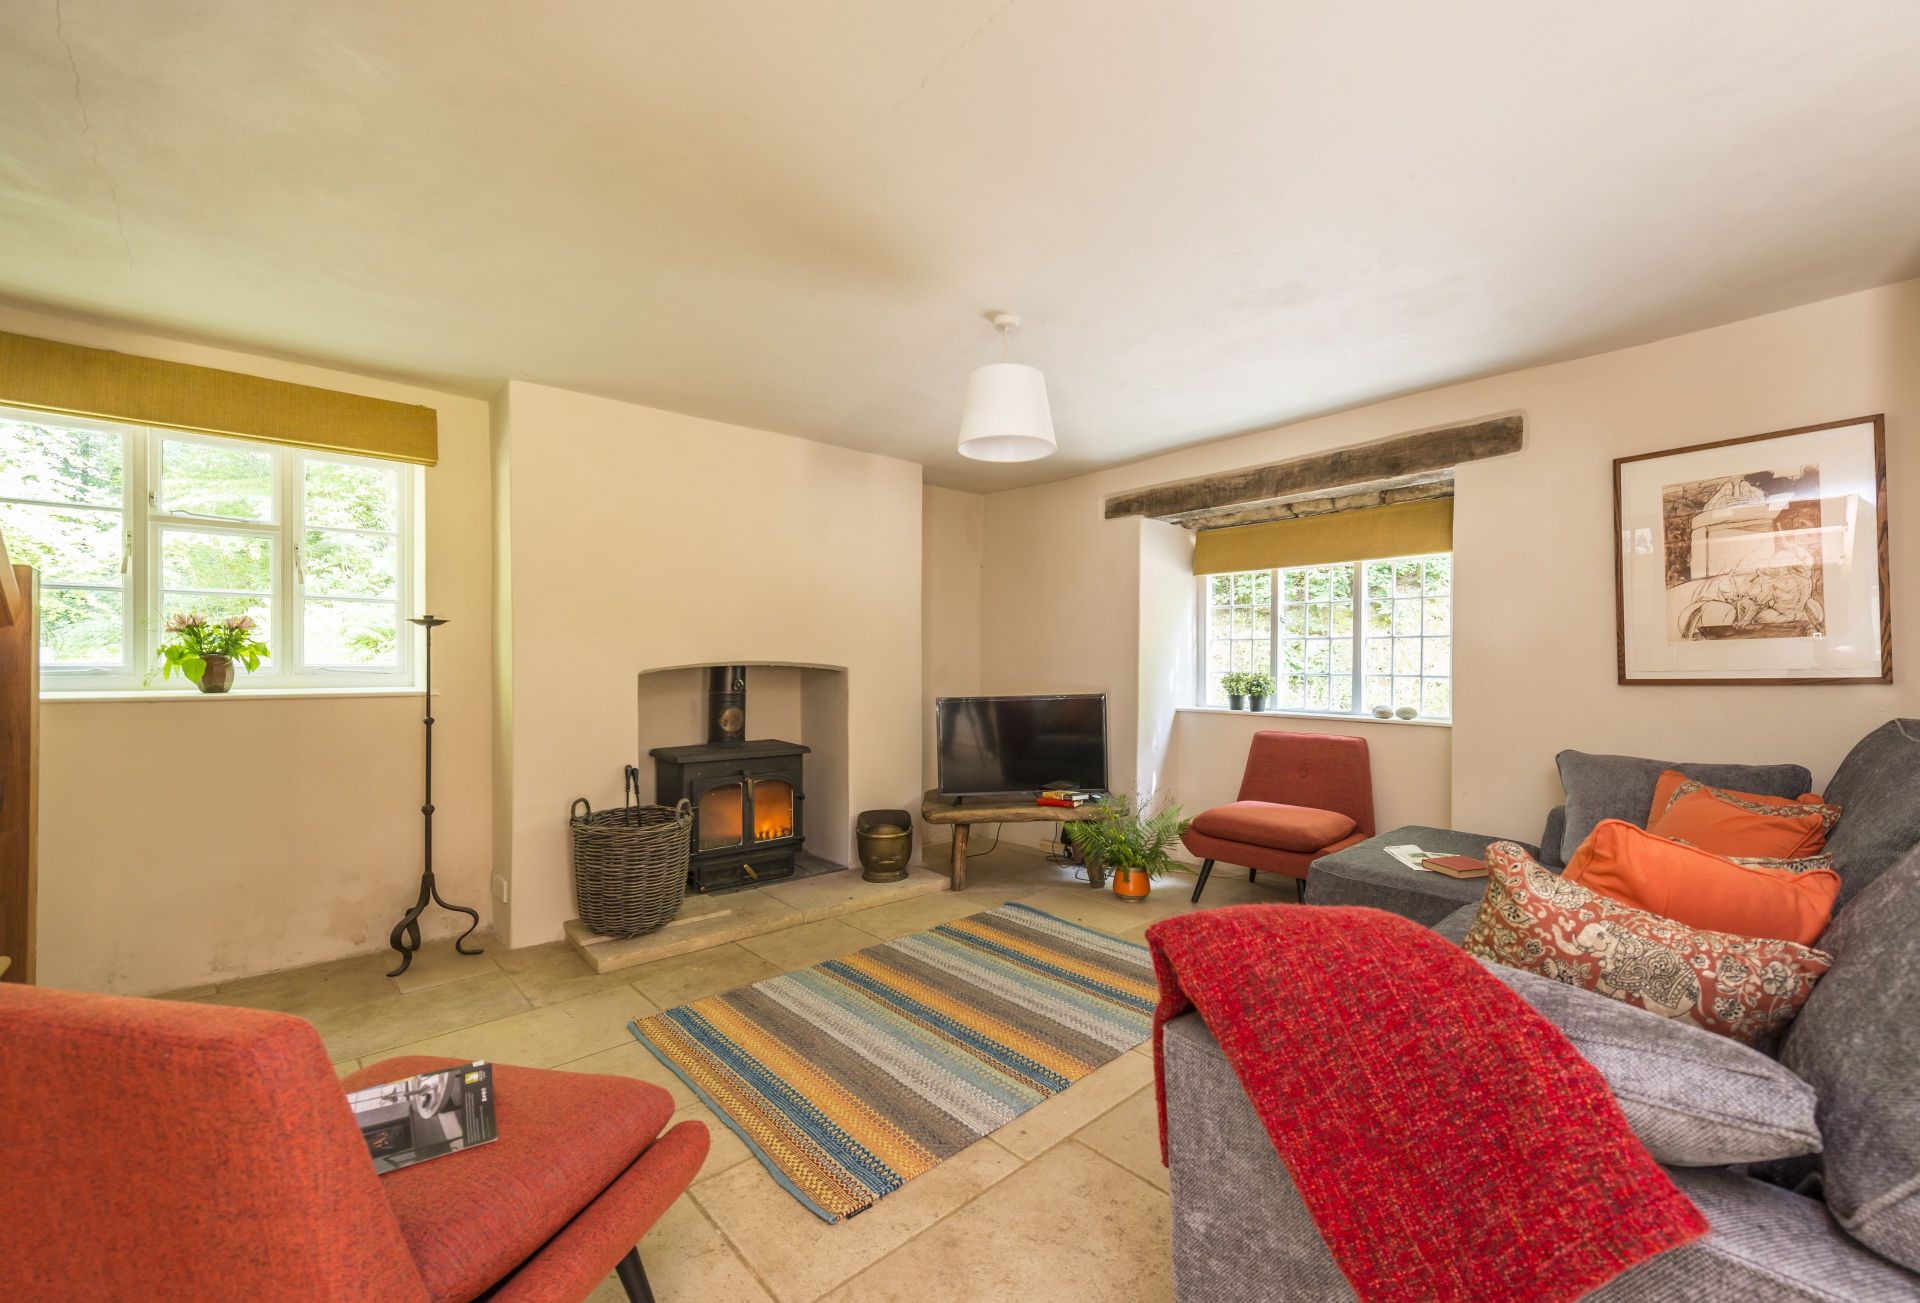 Horsehill Cottage is located in Beaminster and surrounding villages